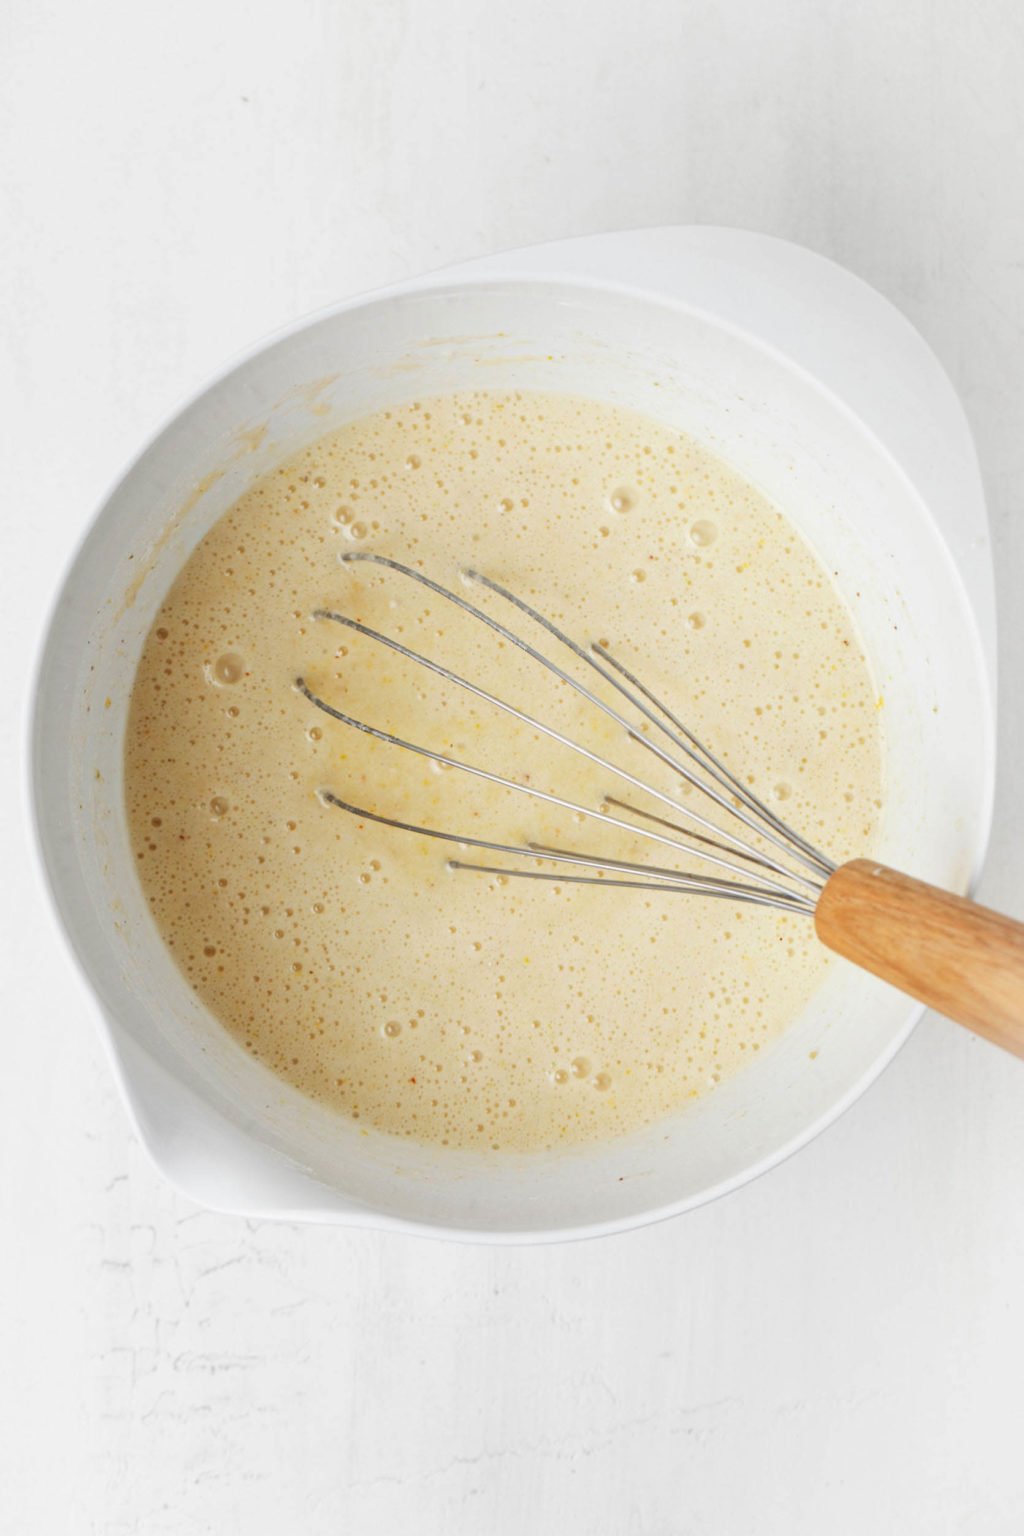 Cake batter is pictured in a white mixing bowl, along with a silver whisk with a wooden handle..